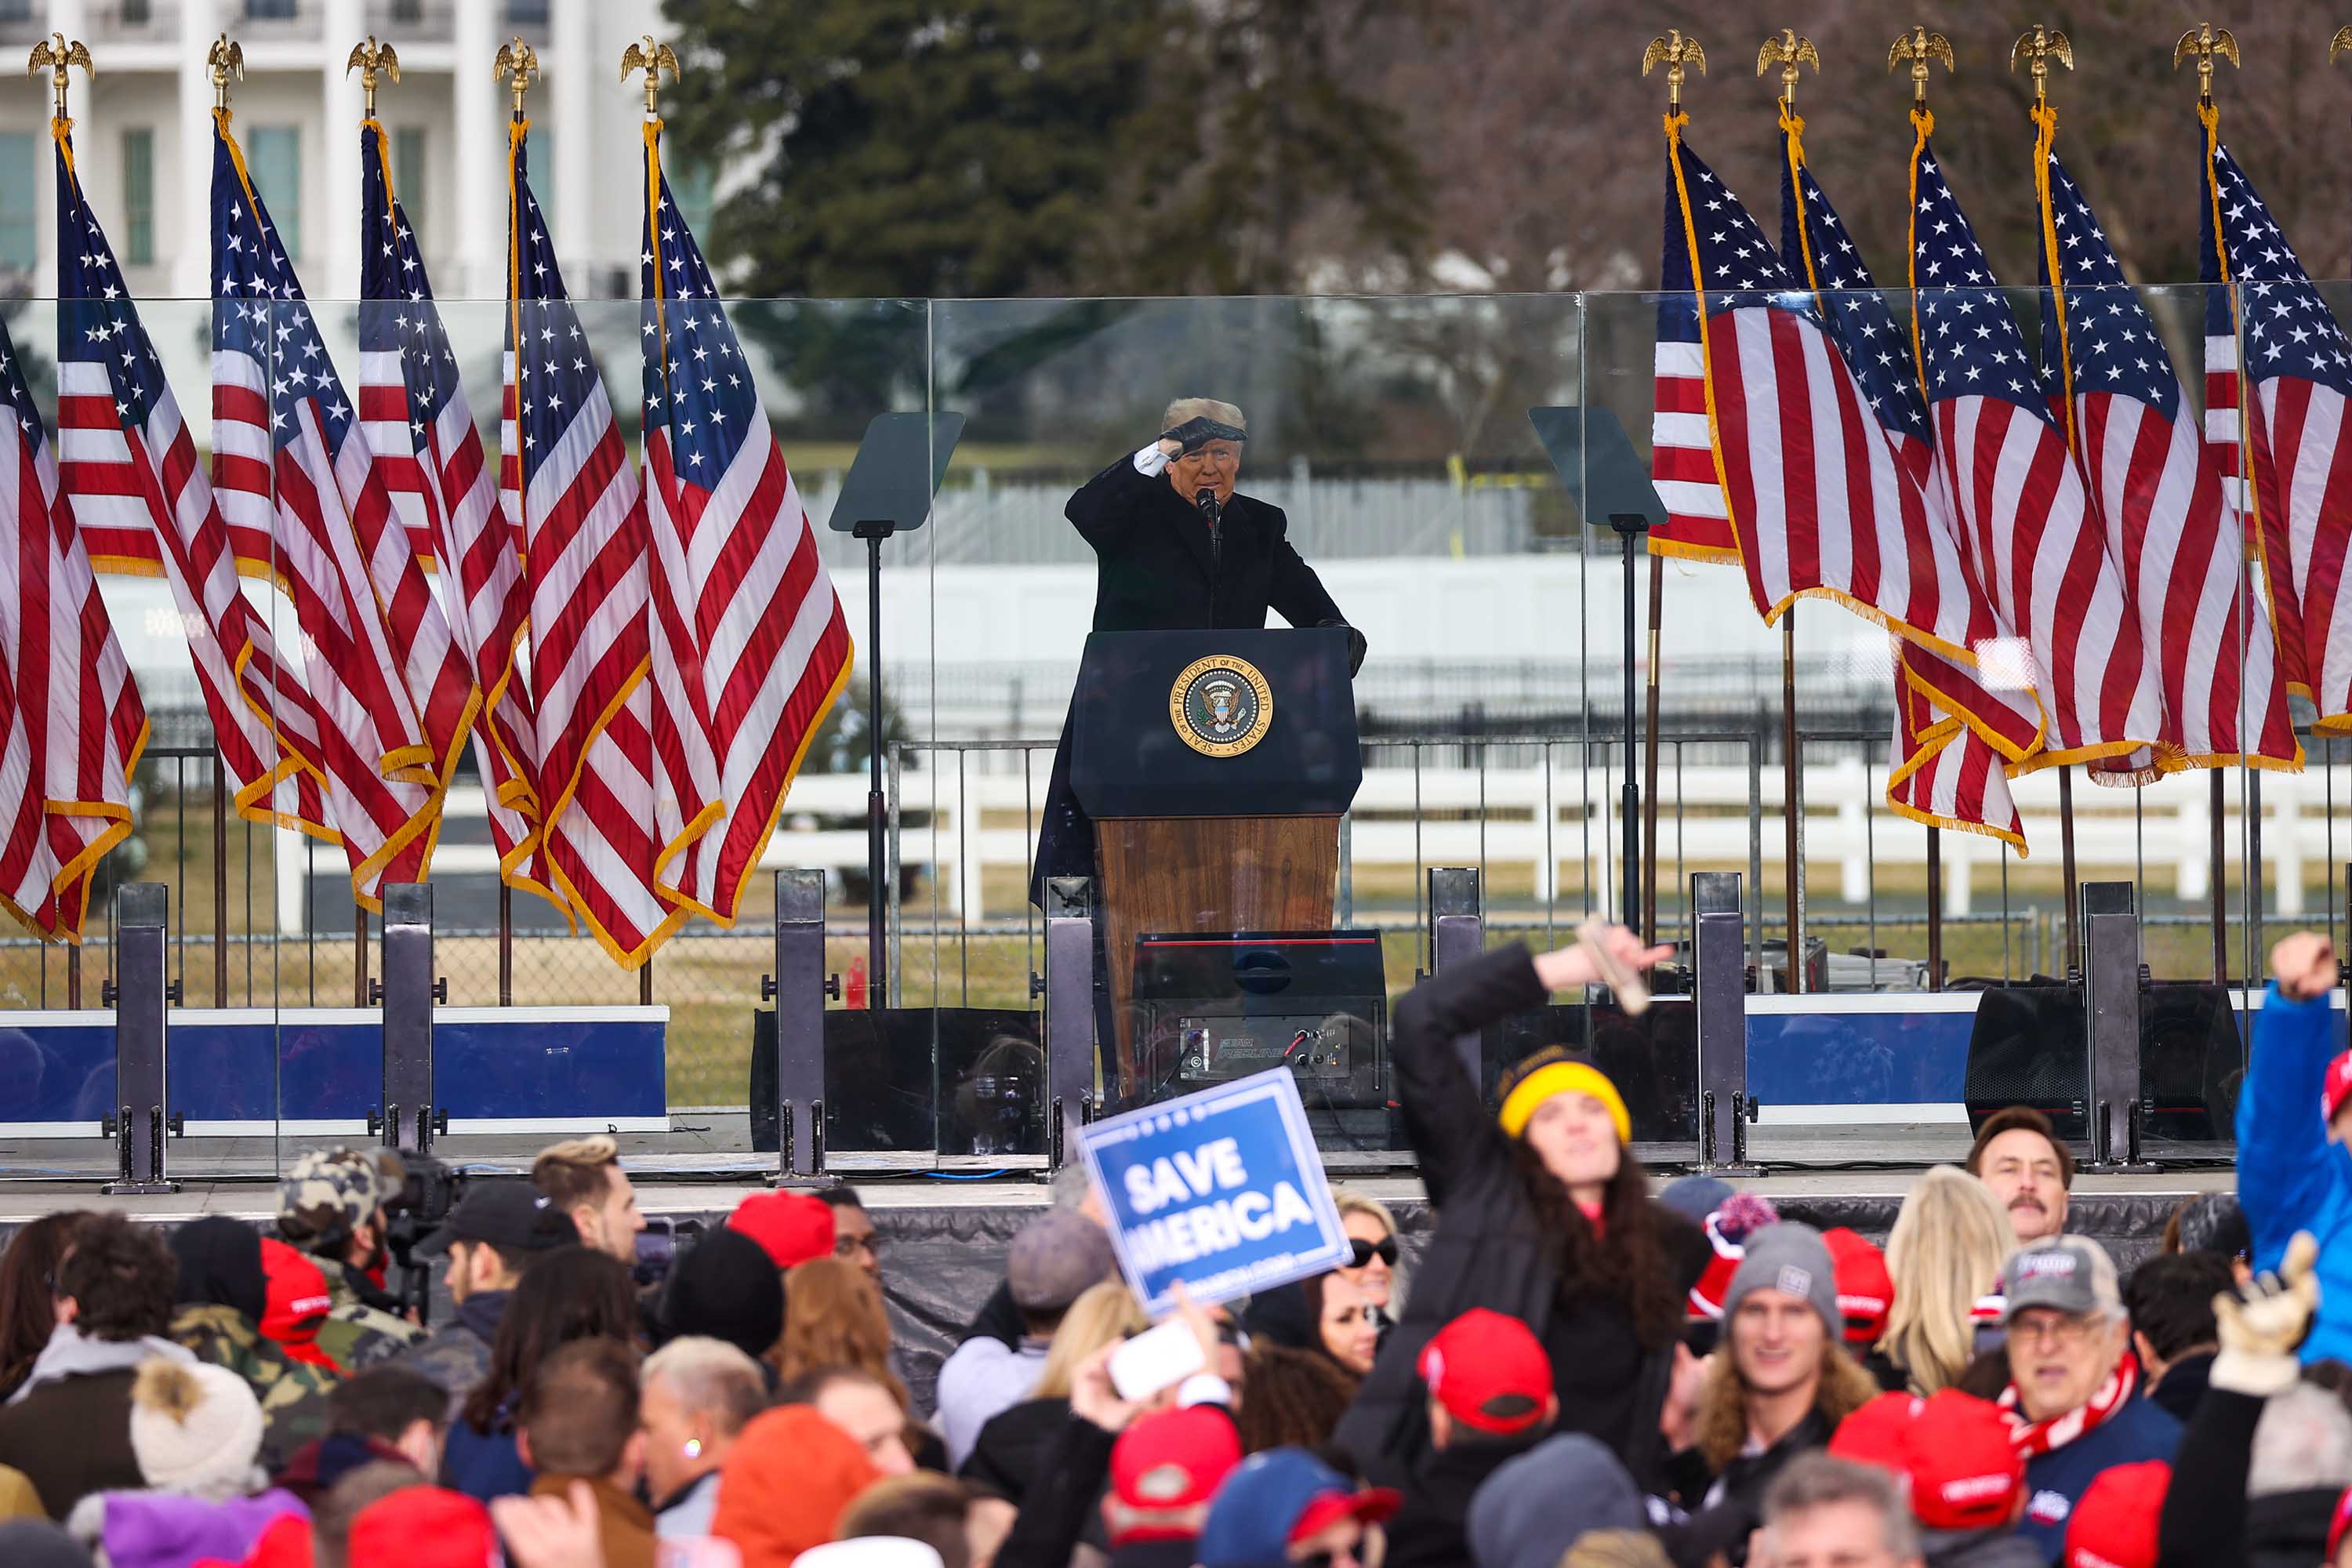 President Trump speaks to supporters at the Save America Rally in Washington D.C., on January 6.